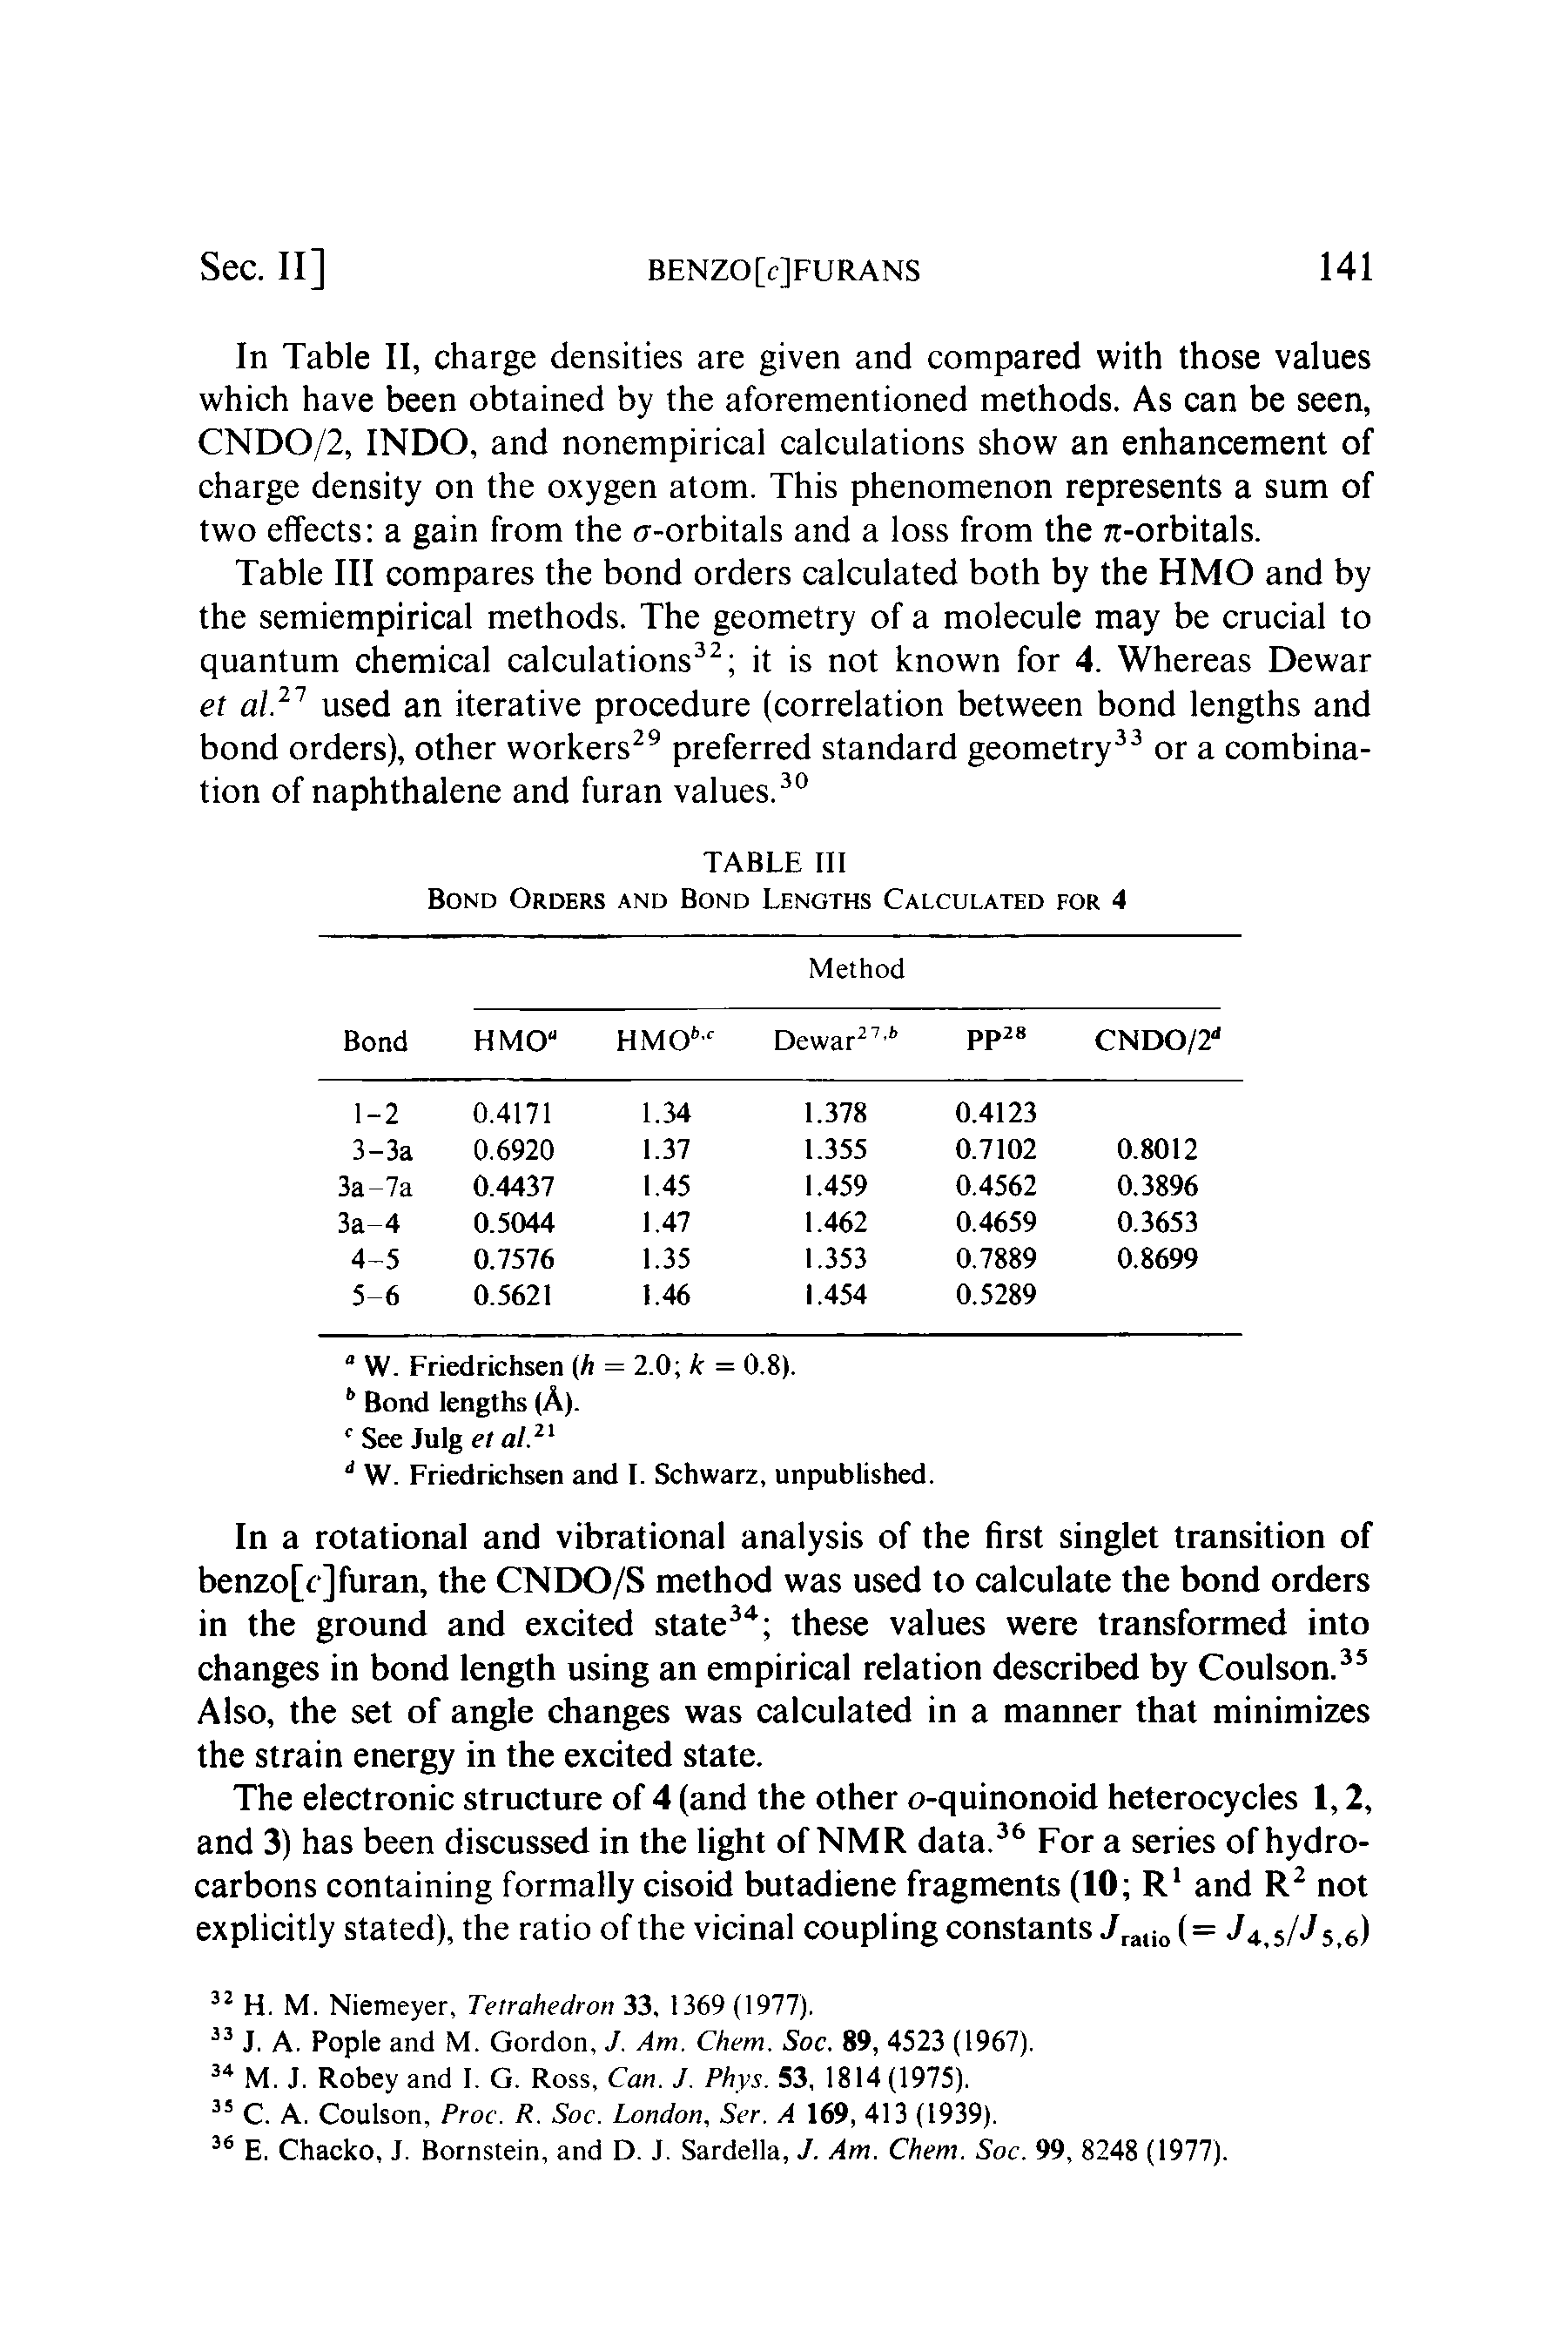 Table III compares the bond orders calculated both by the HMO and by the semiempirical methods. The geometry of a molecule may be crucial to quantum chemical calculations it is not known for 4. Whereas Dewar et used an iterative procedure (correlation between bond lengths and bond orders), other workers preferred standard geometry or a combination of naphthalene and furan values. ...